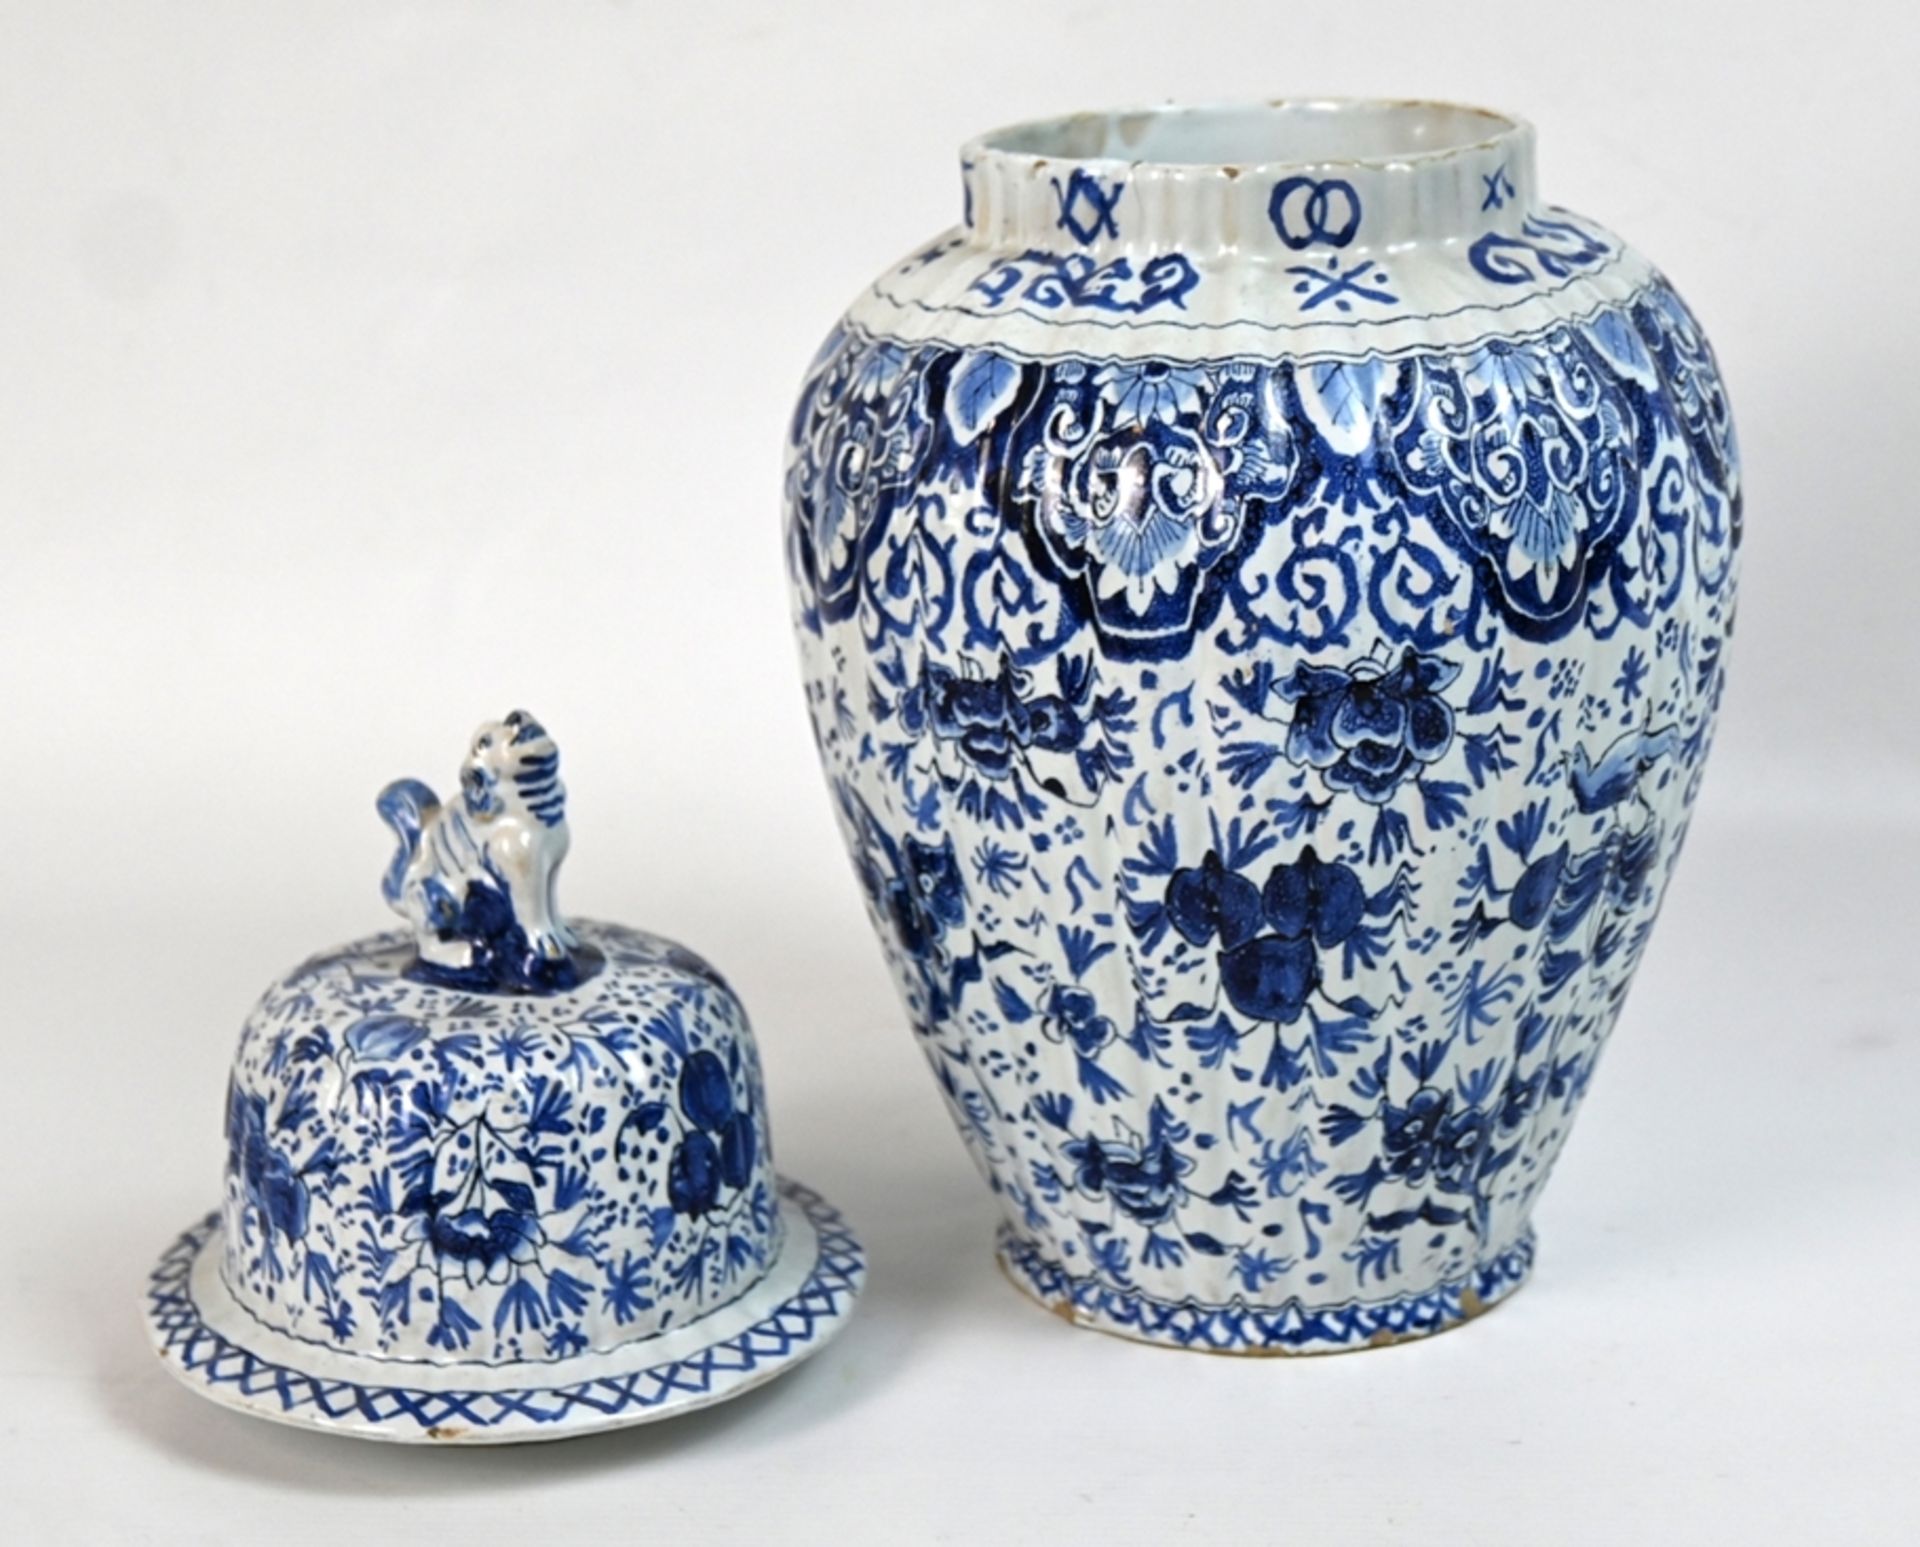 Lidded vase from Delft, around 1710/20. Blue painting with stylised flowers, fruit and birds.